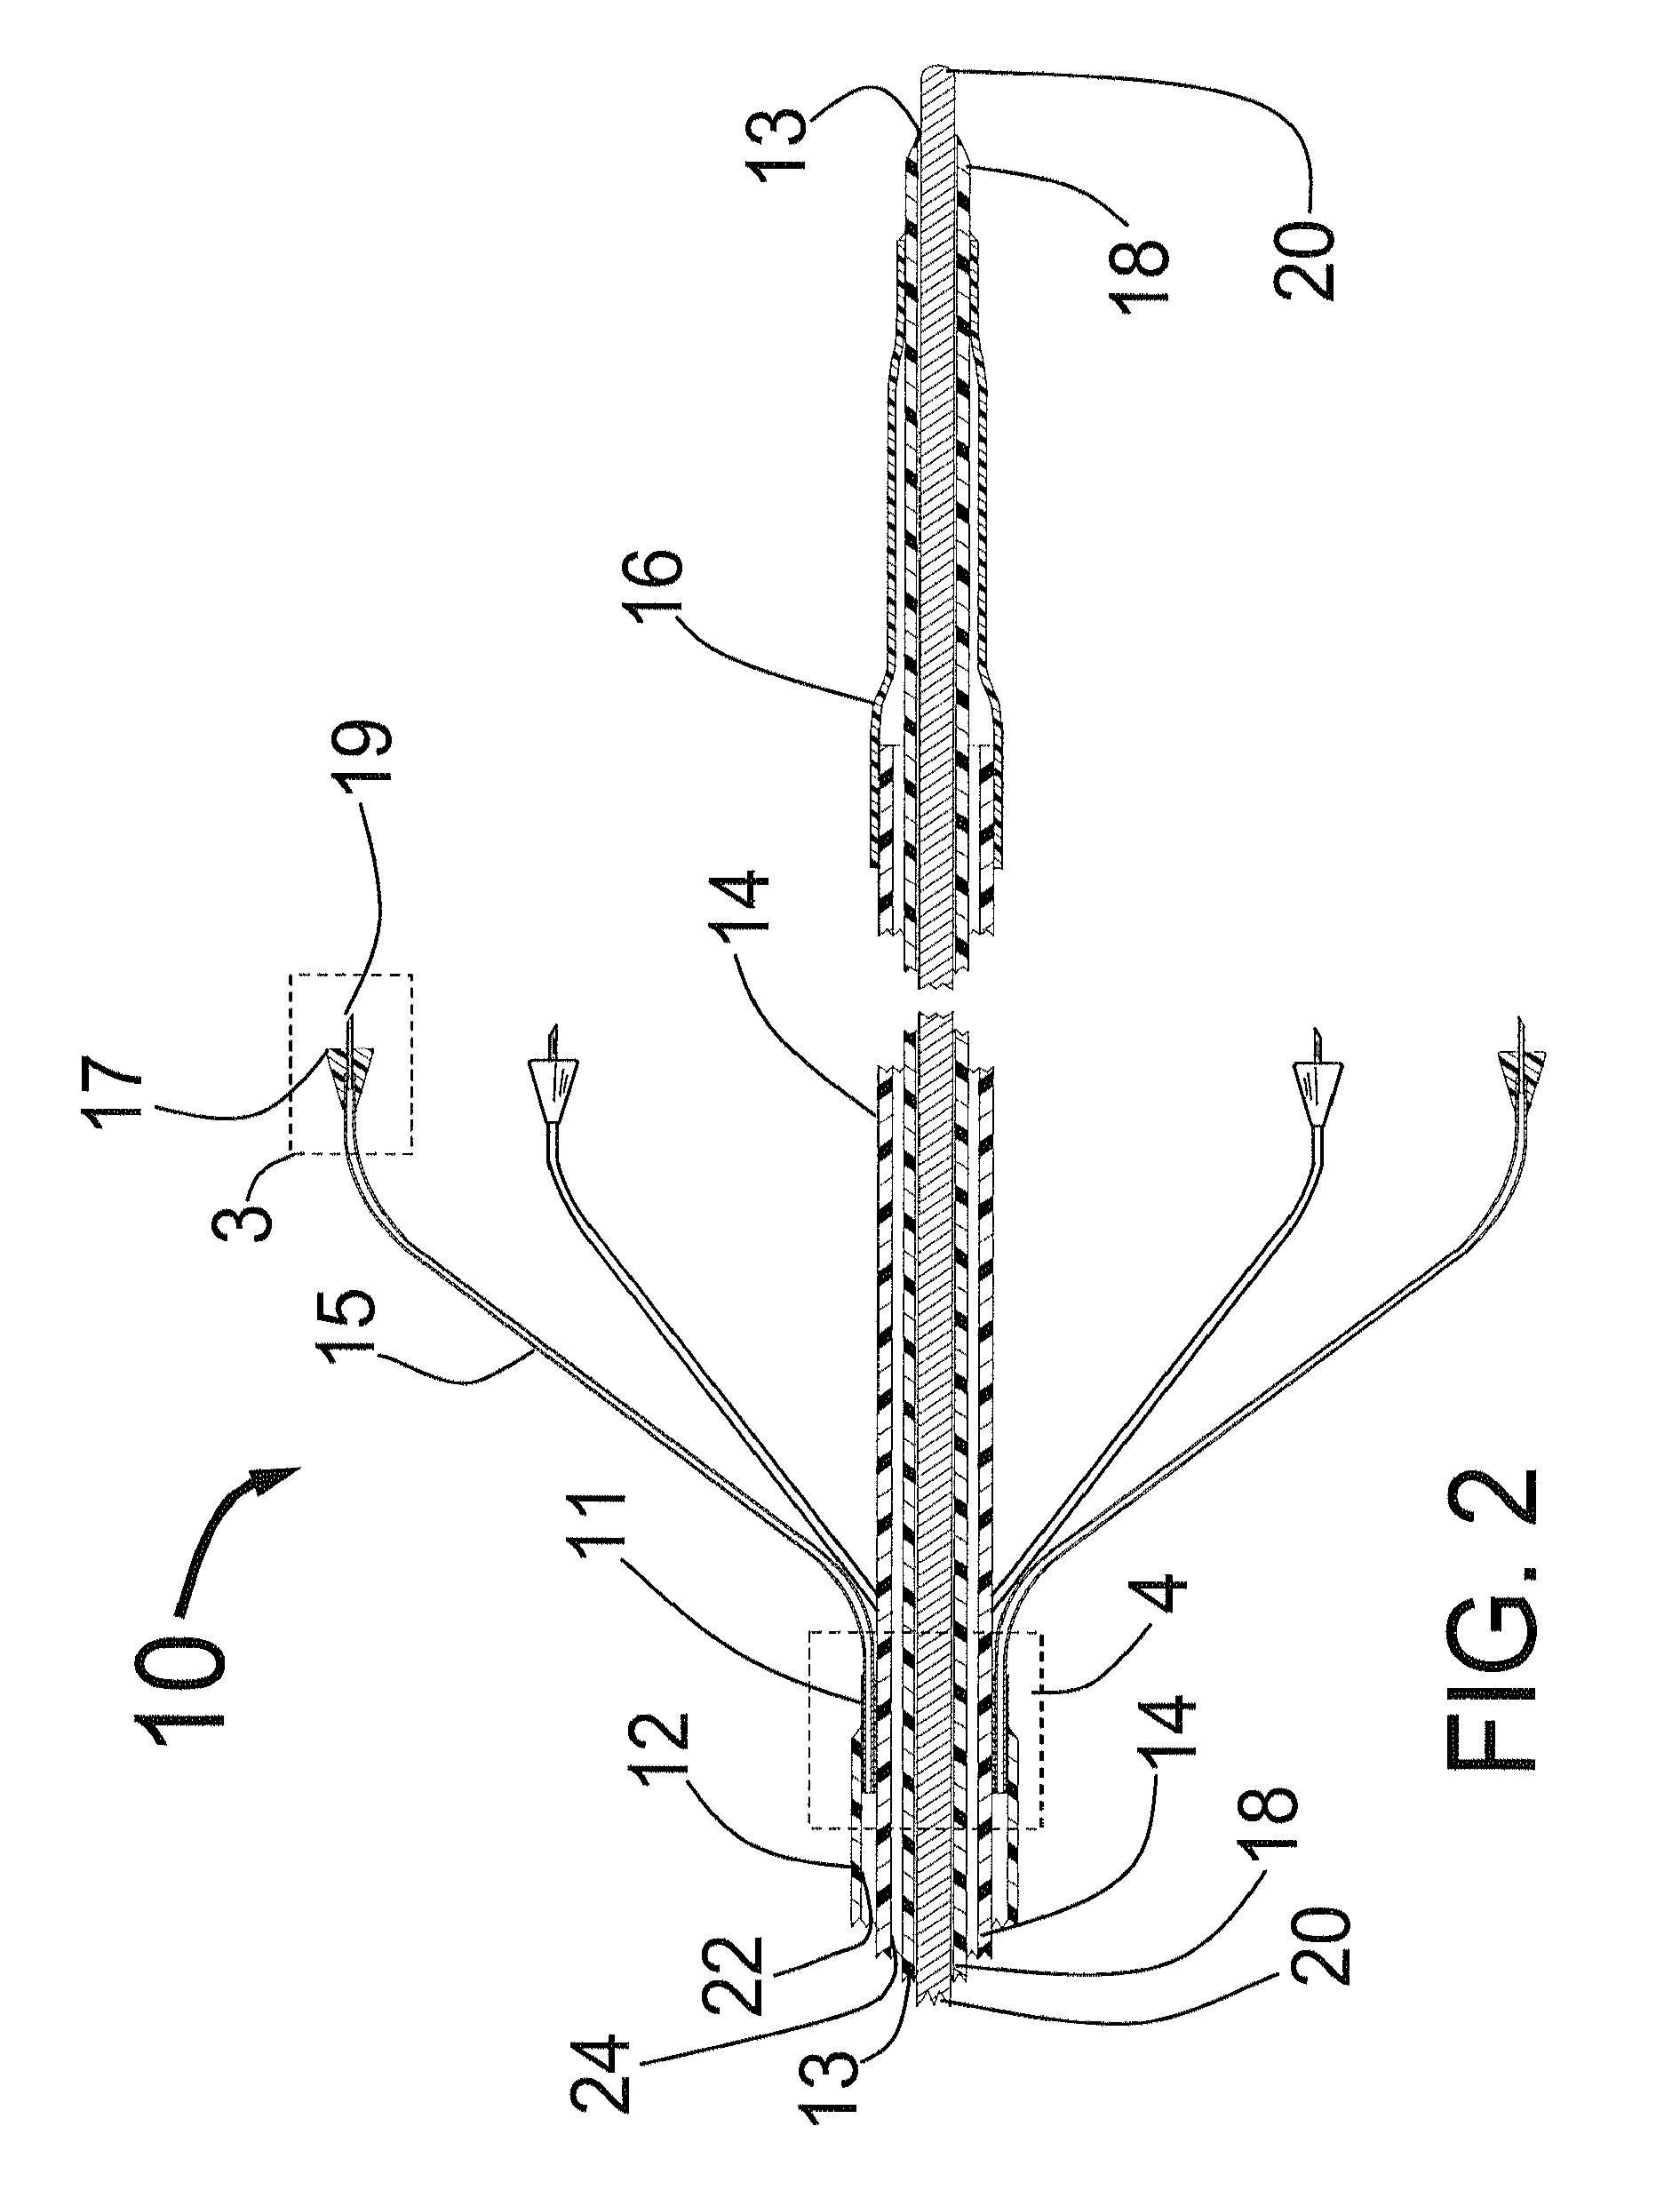 Expandable catheter system for peri-ostial injection and muscle and nerve fiber ablation